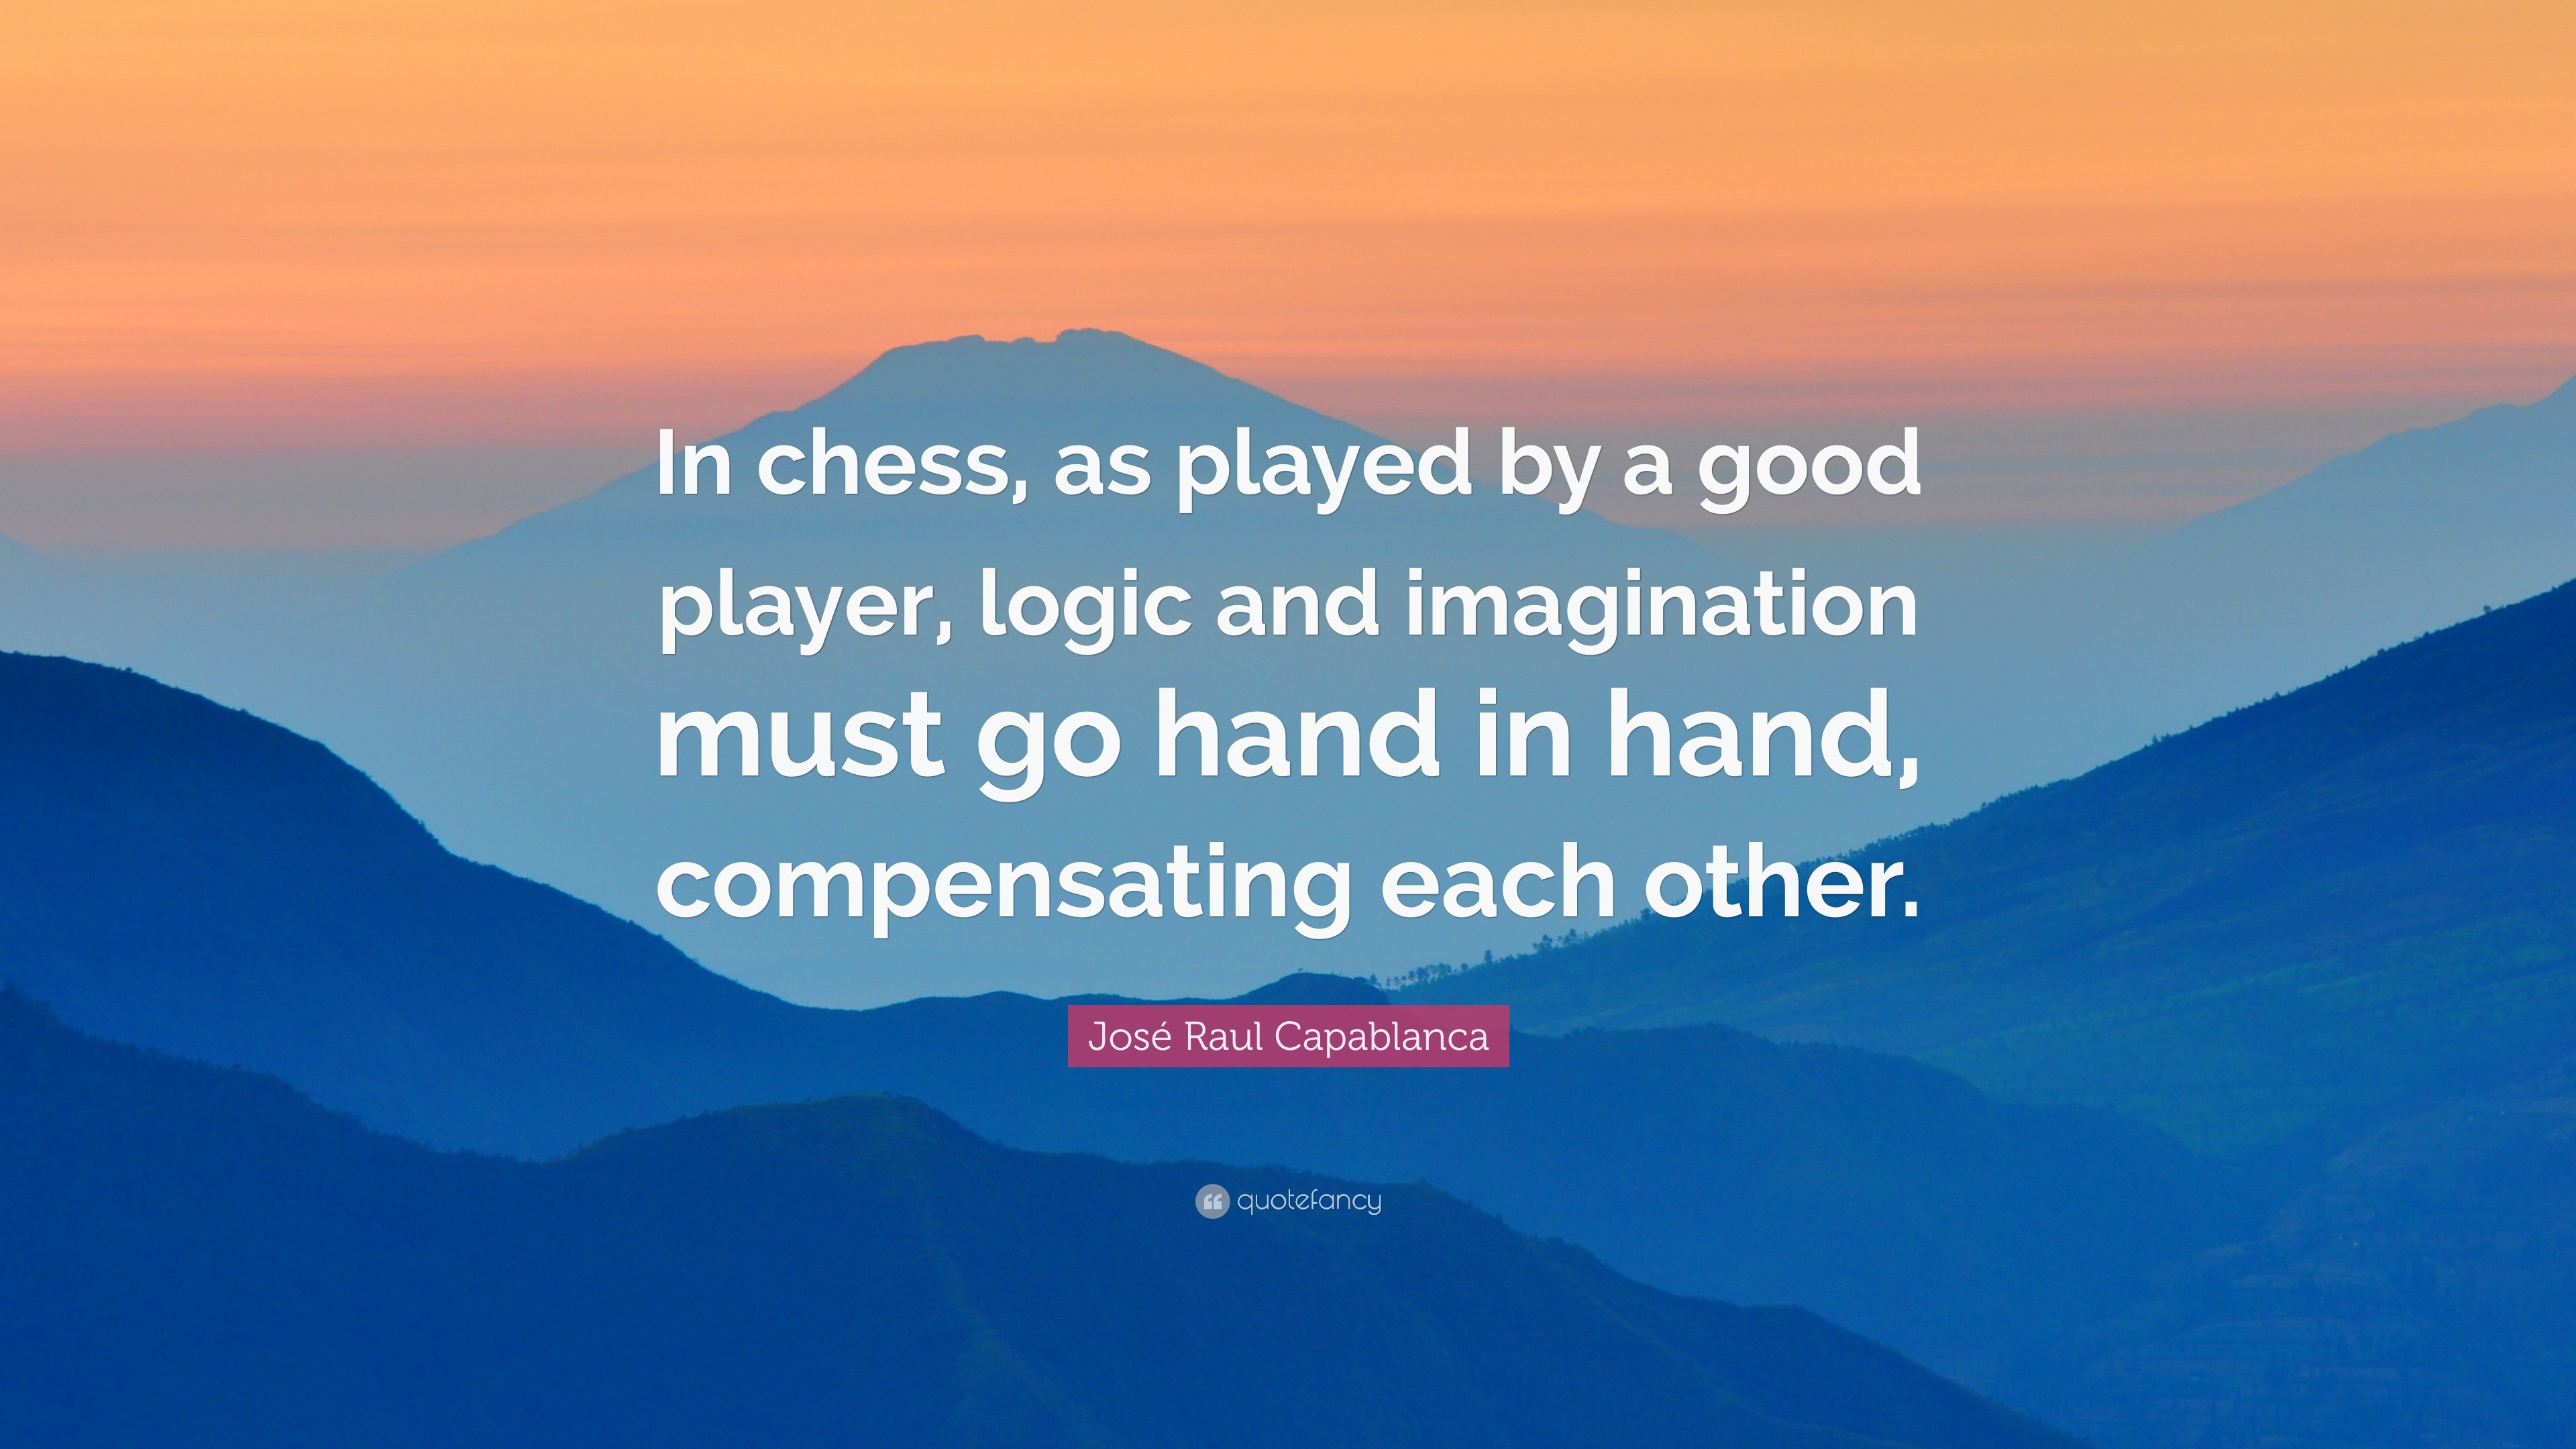 José Raul Capablanca Quote: “Alekhine evidently possesses the most